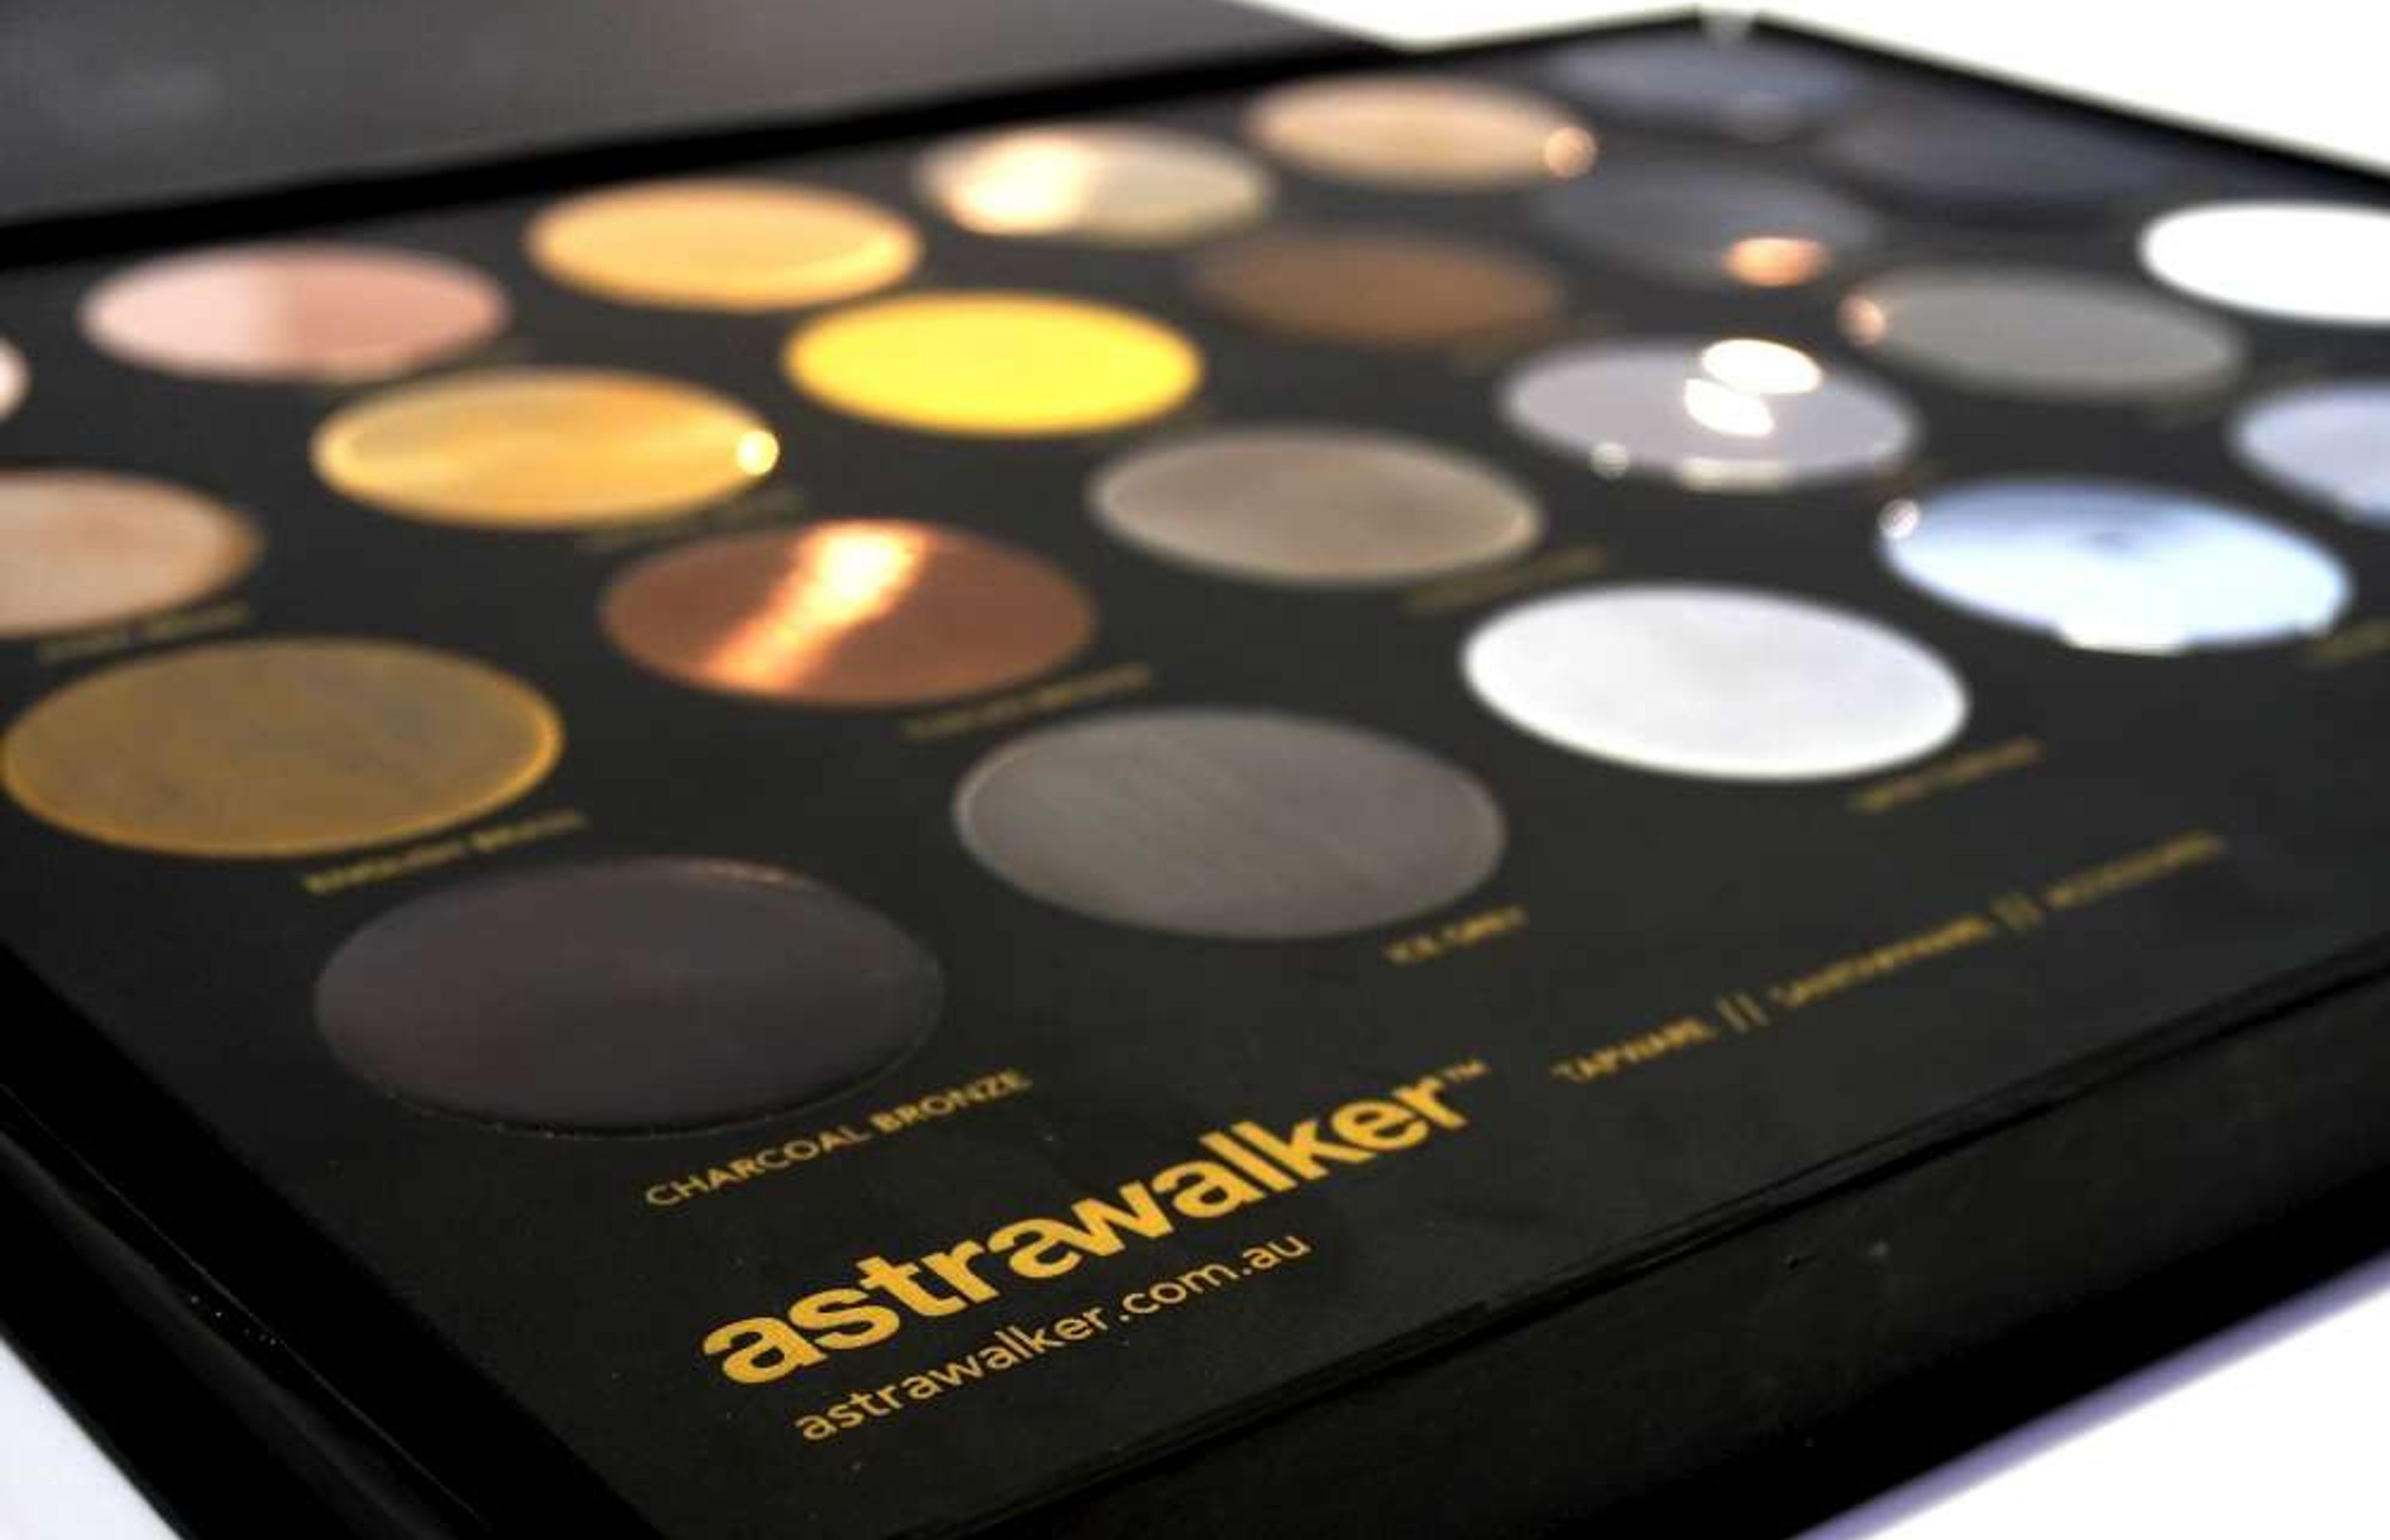 Astra Walker provides over 23 finishes and textures which means that you can choose your tapware in any colour or texture provided